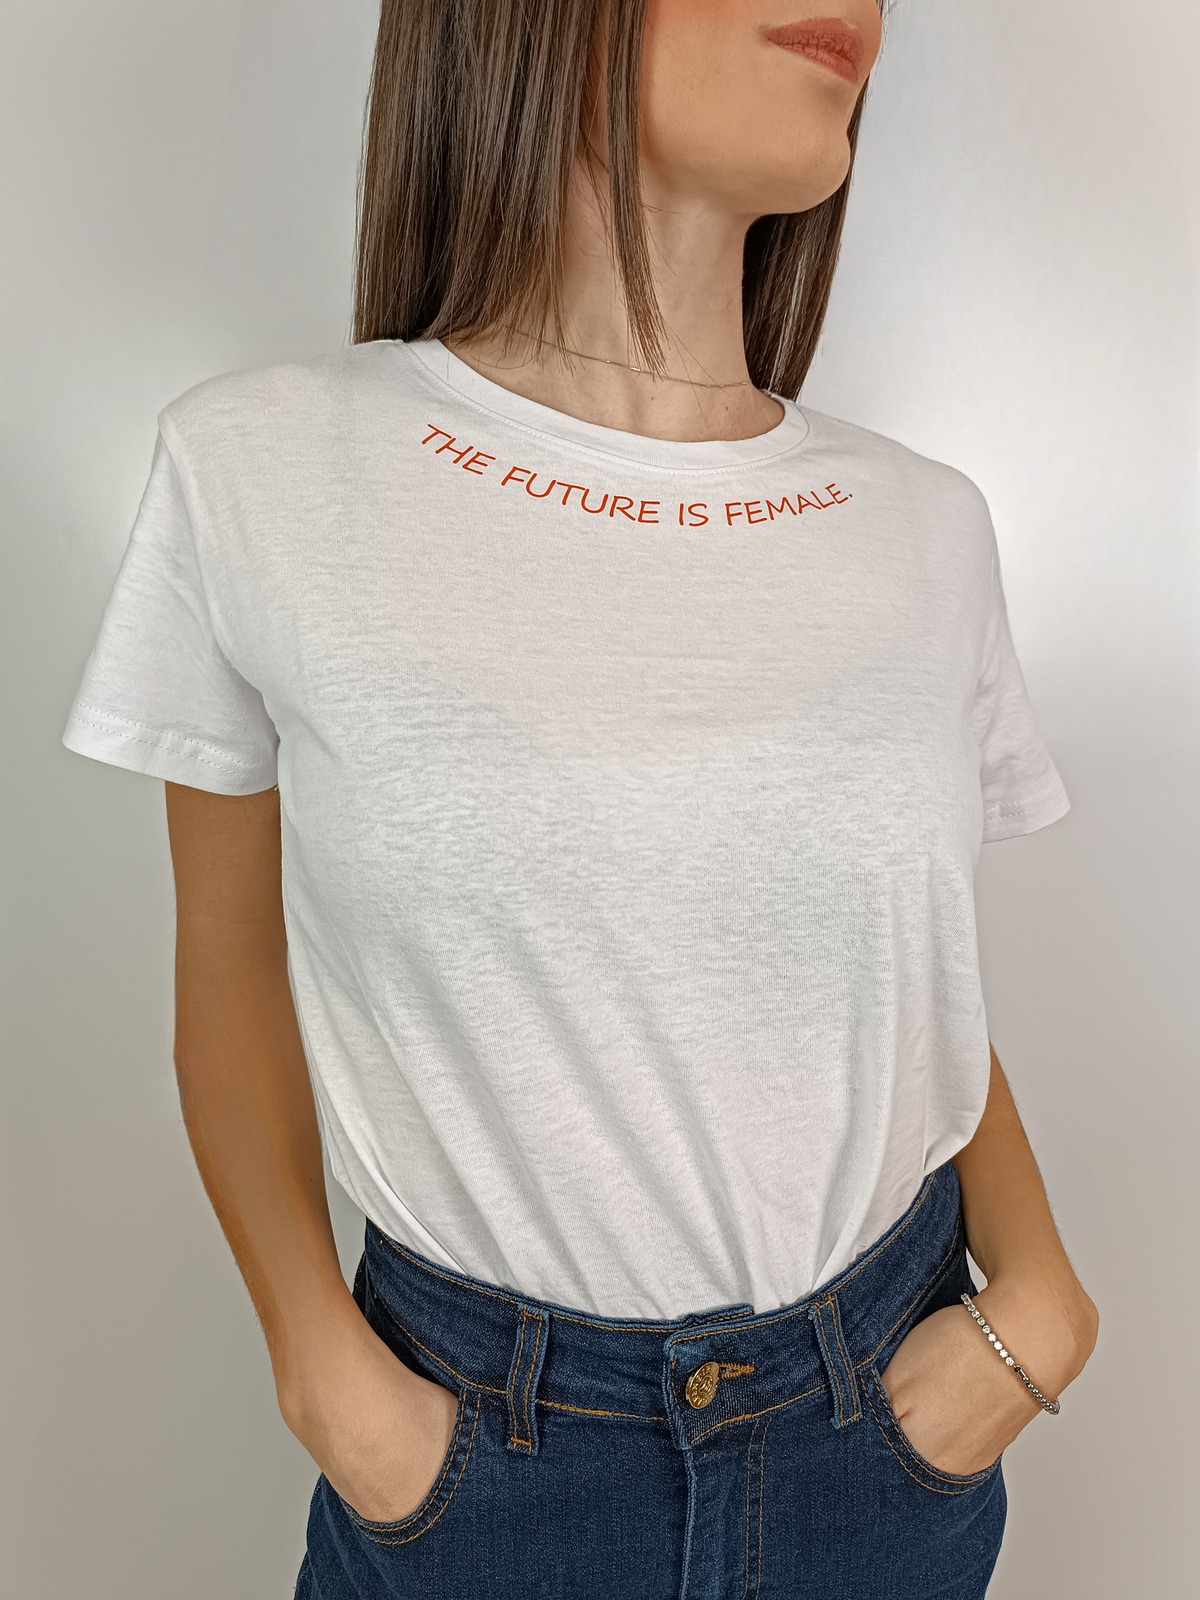 T shirt "the future is female"